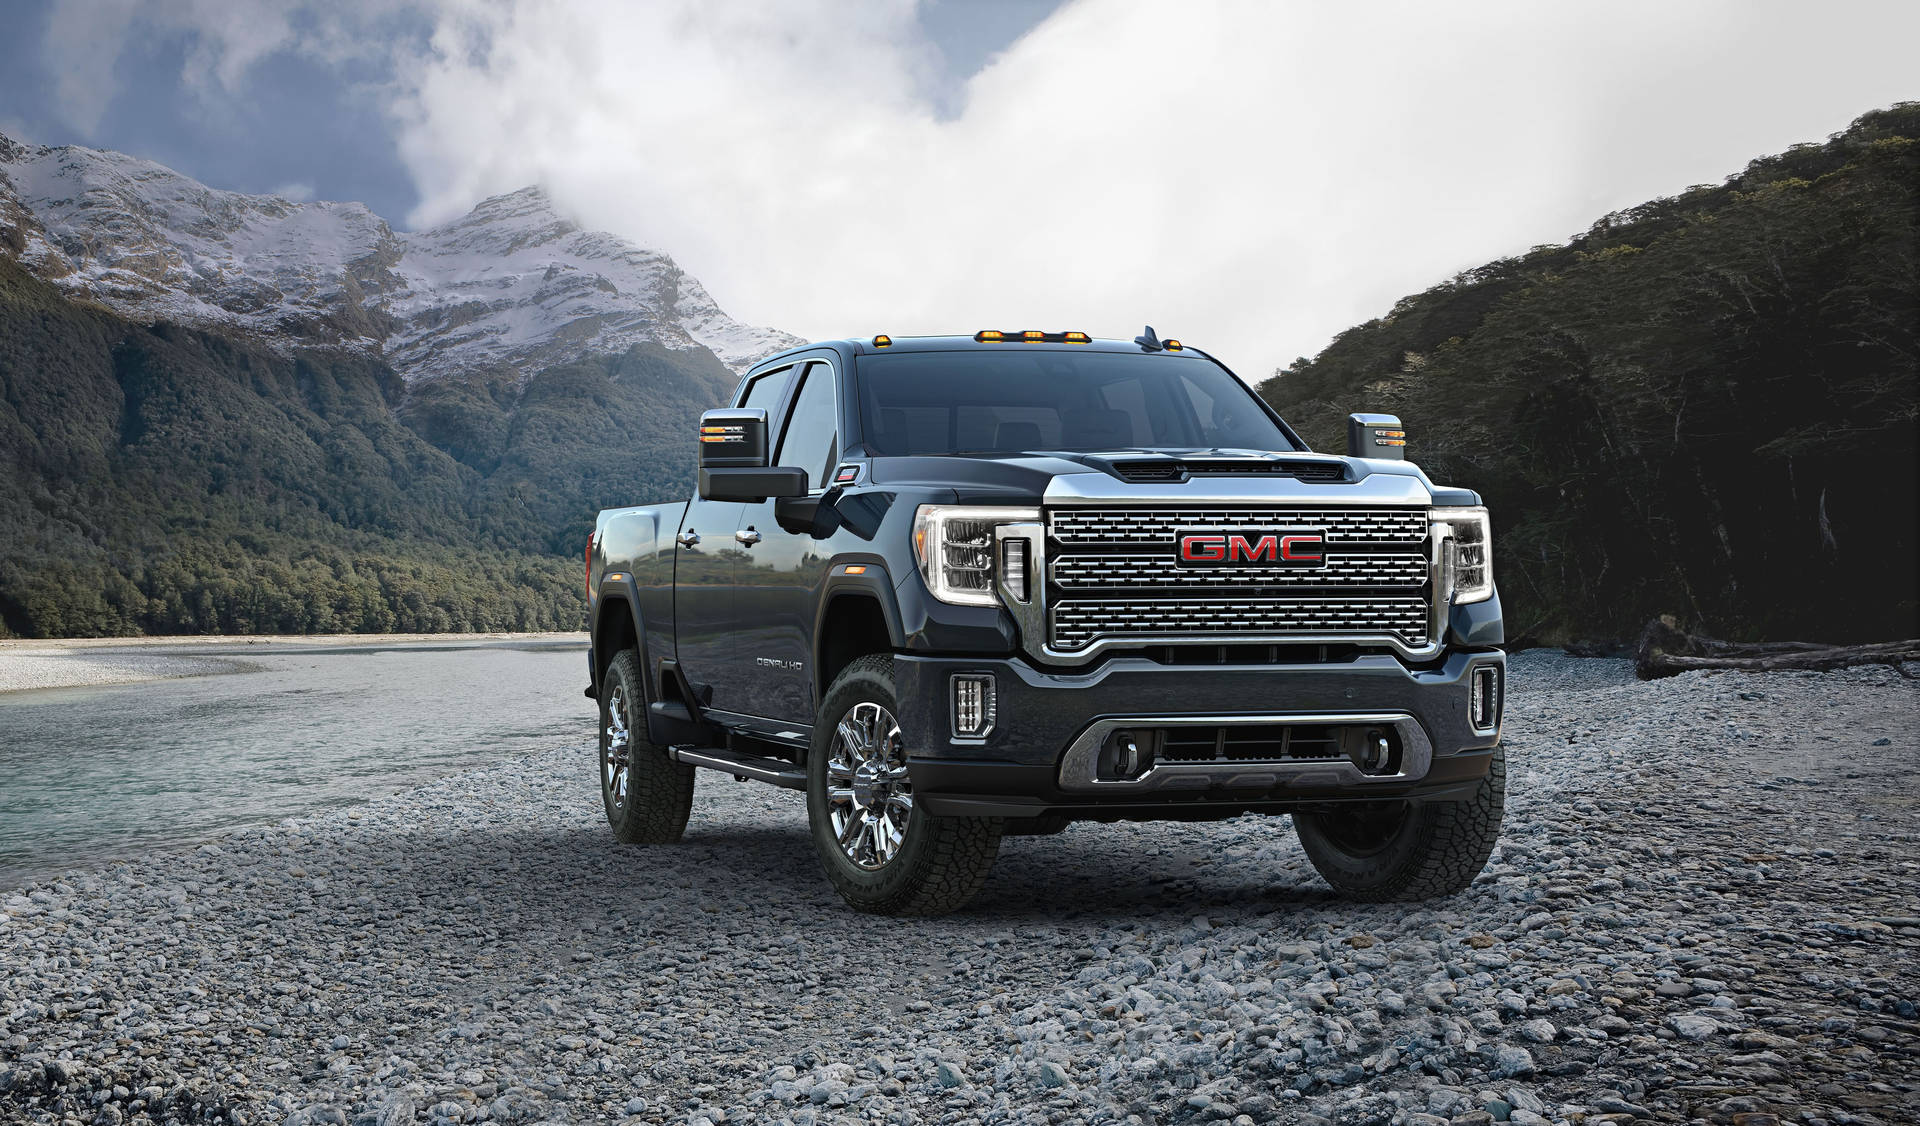 Rugged Power Meets Gracious Style - Gmc Pickup Truck Wallpaper